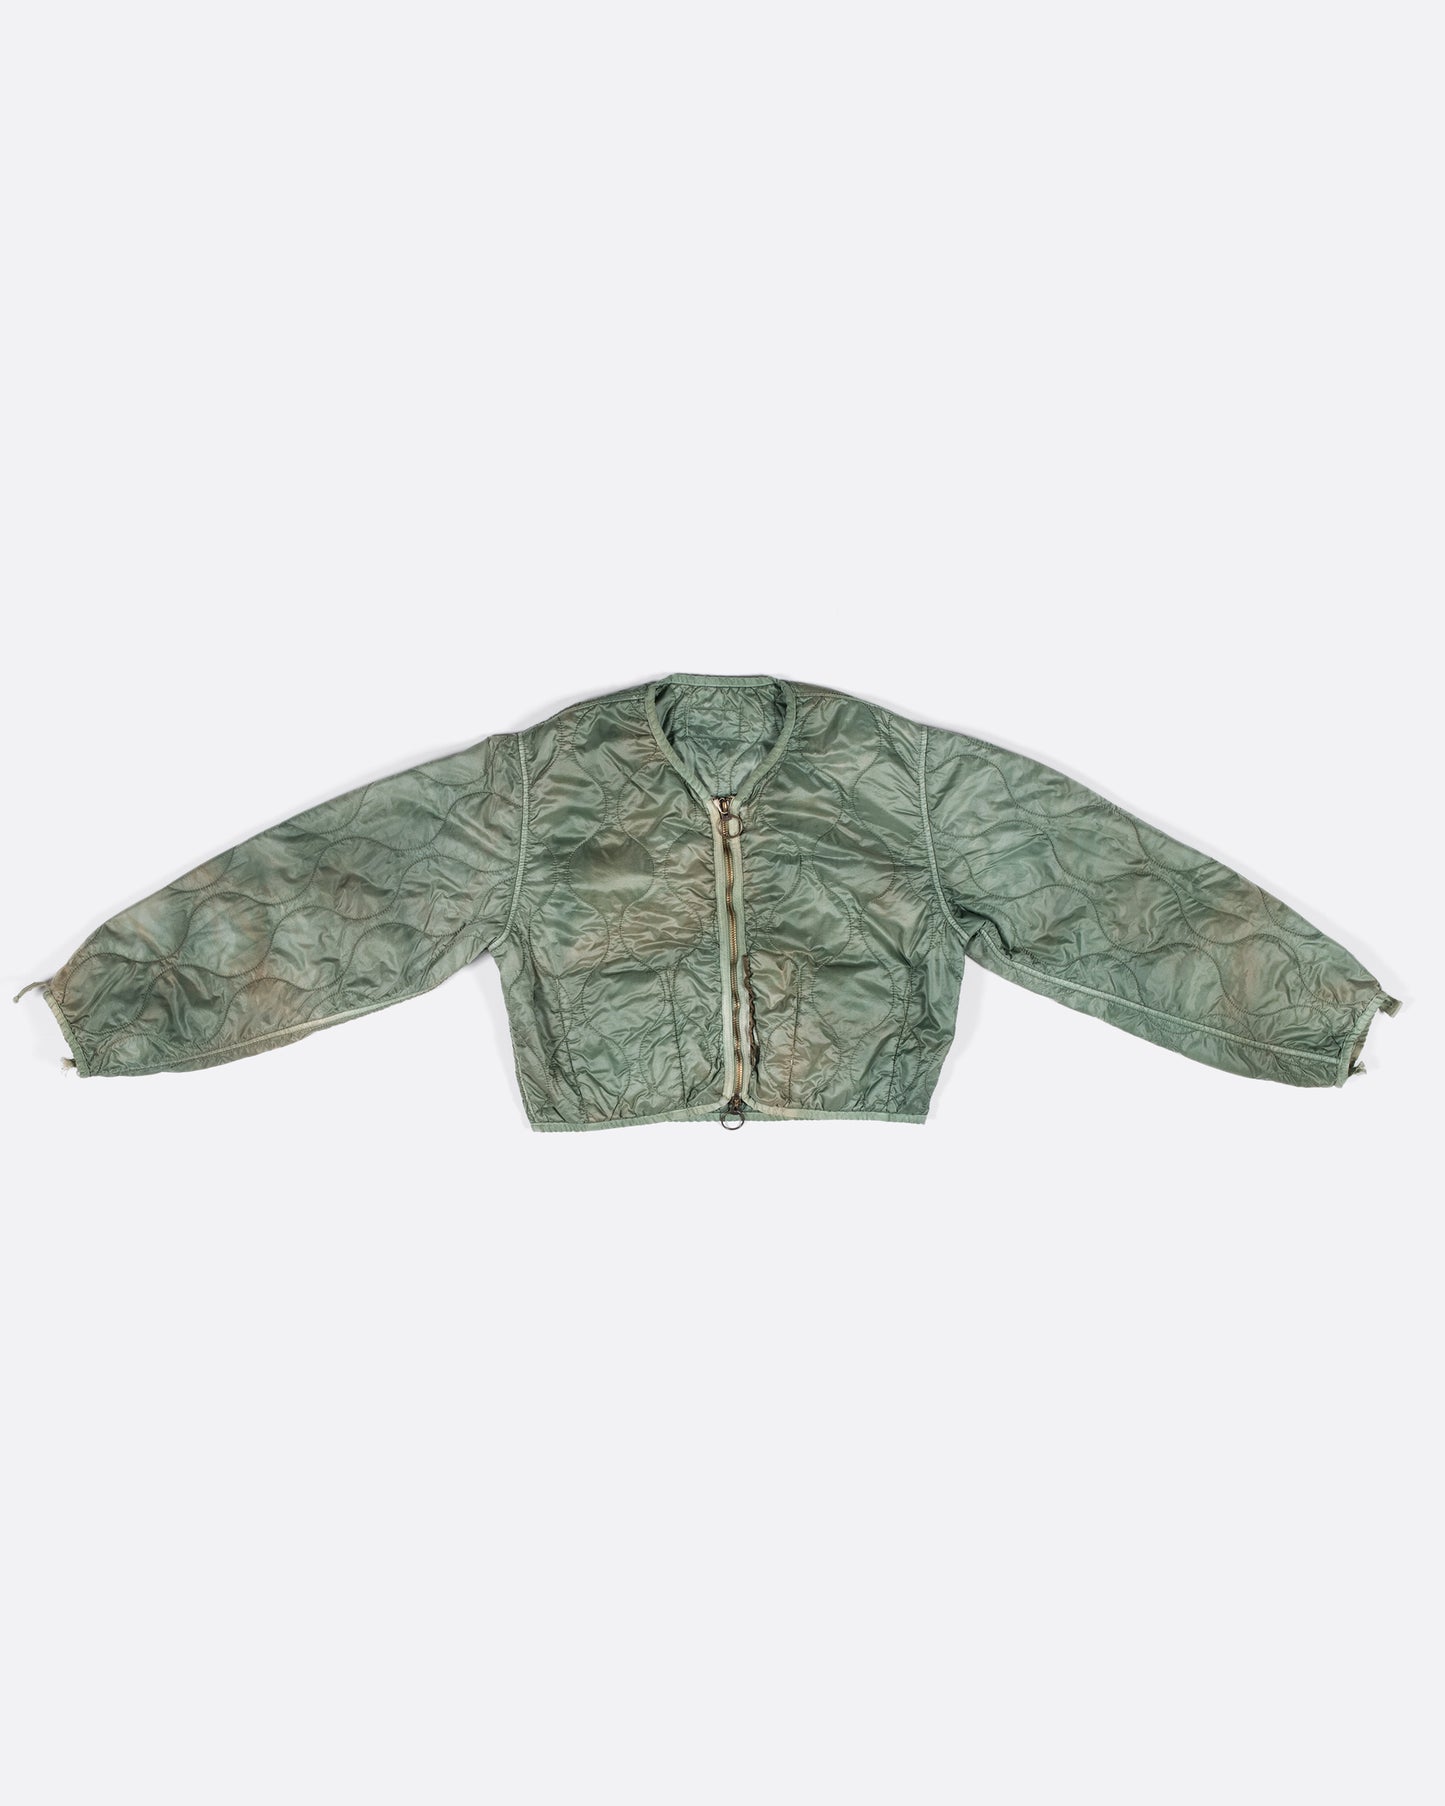 A nylon, quilted, dip-dyed bolero jacket in a muted sage green - great for layering!